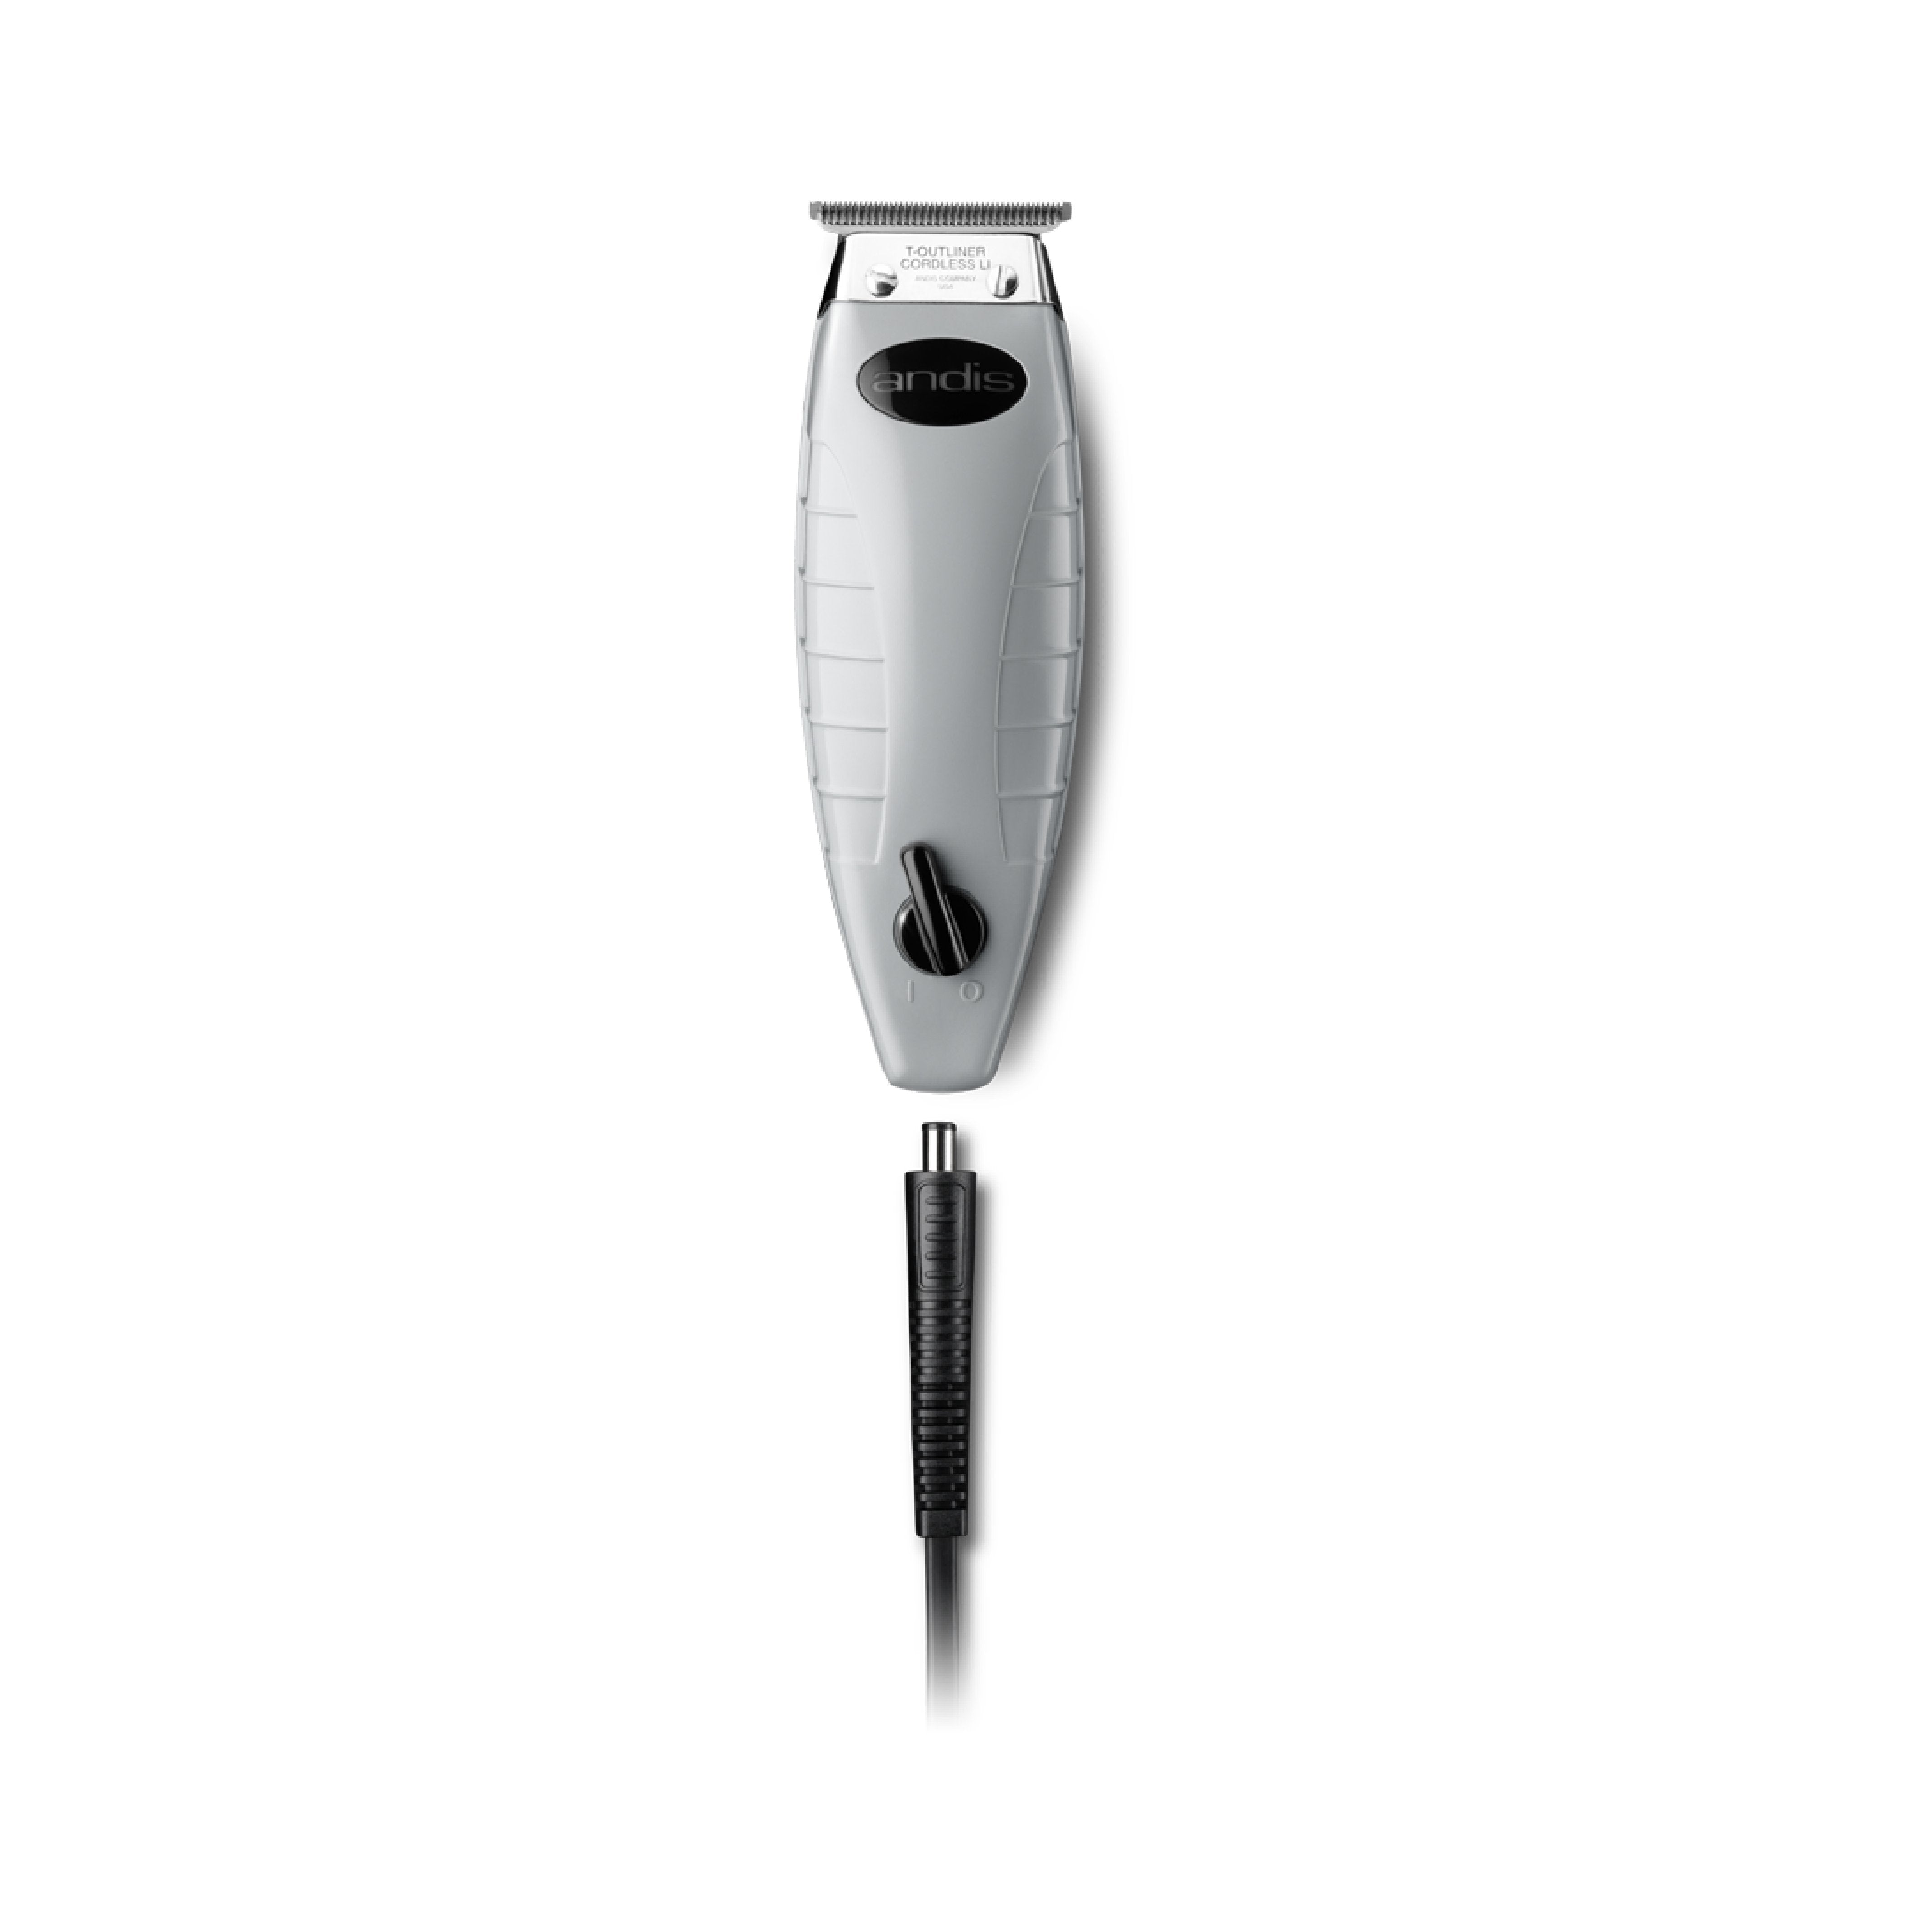 Andis Cordless T-outliner Lithium-ion Trimmer - 74005